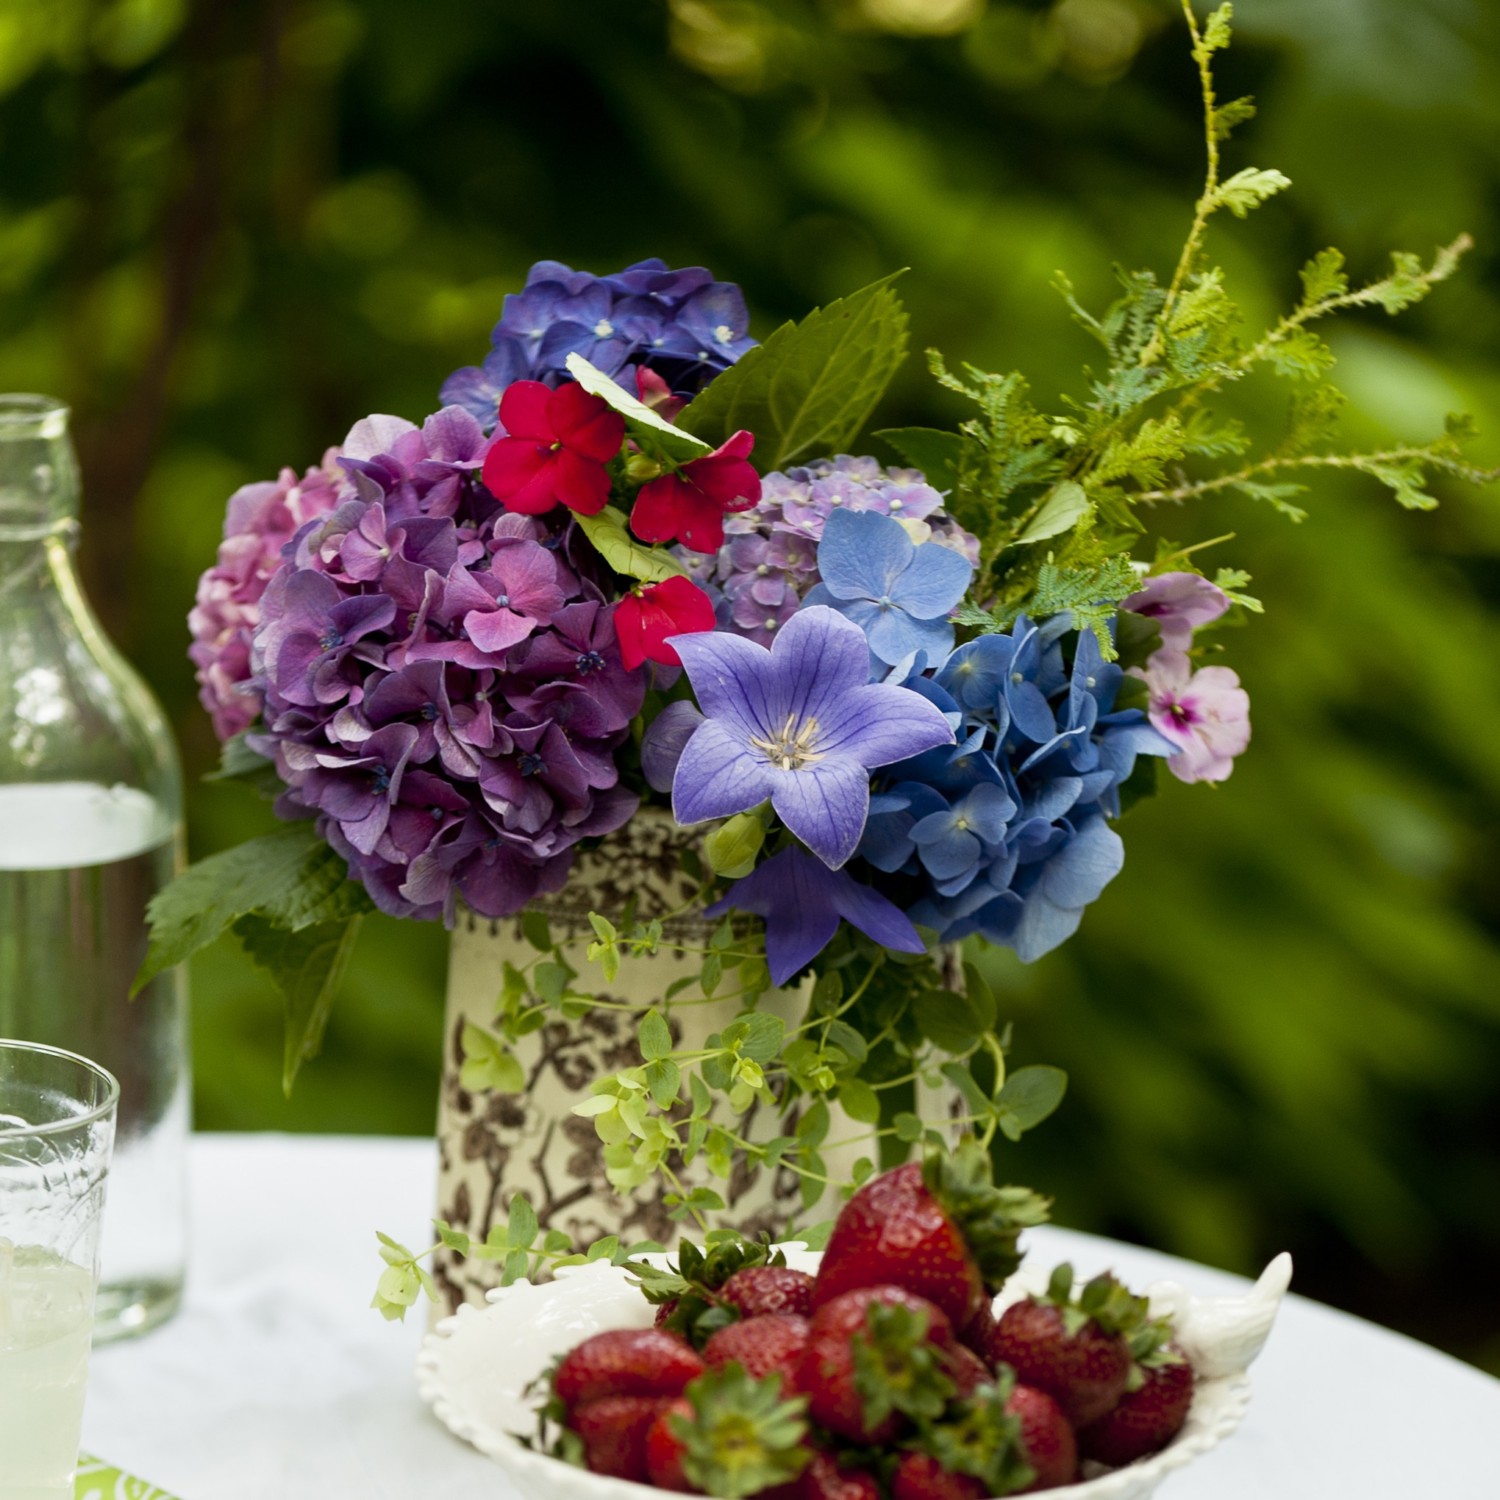 Summery arrangement of pink, purple, and blue hydrangeas with impatiens and a balloon flowers.